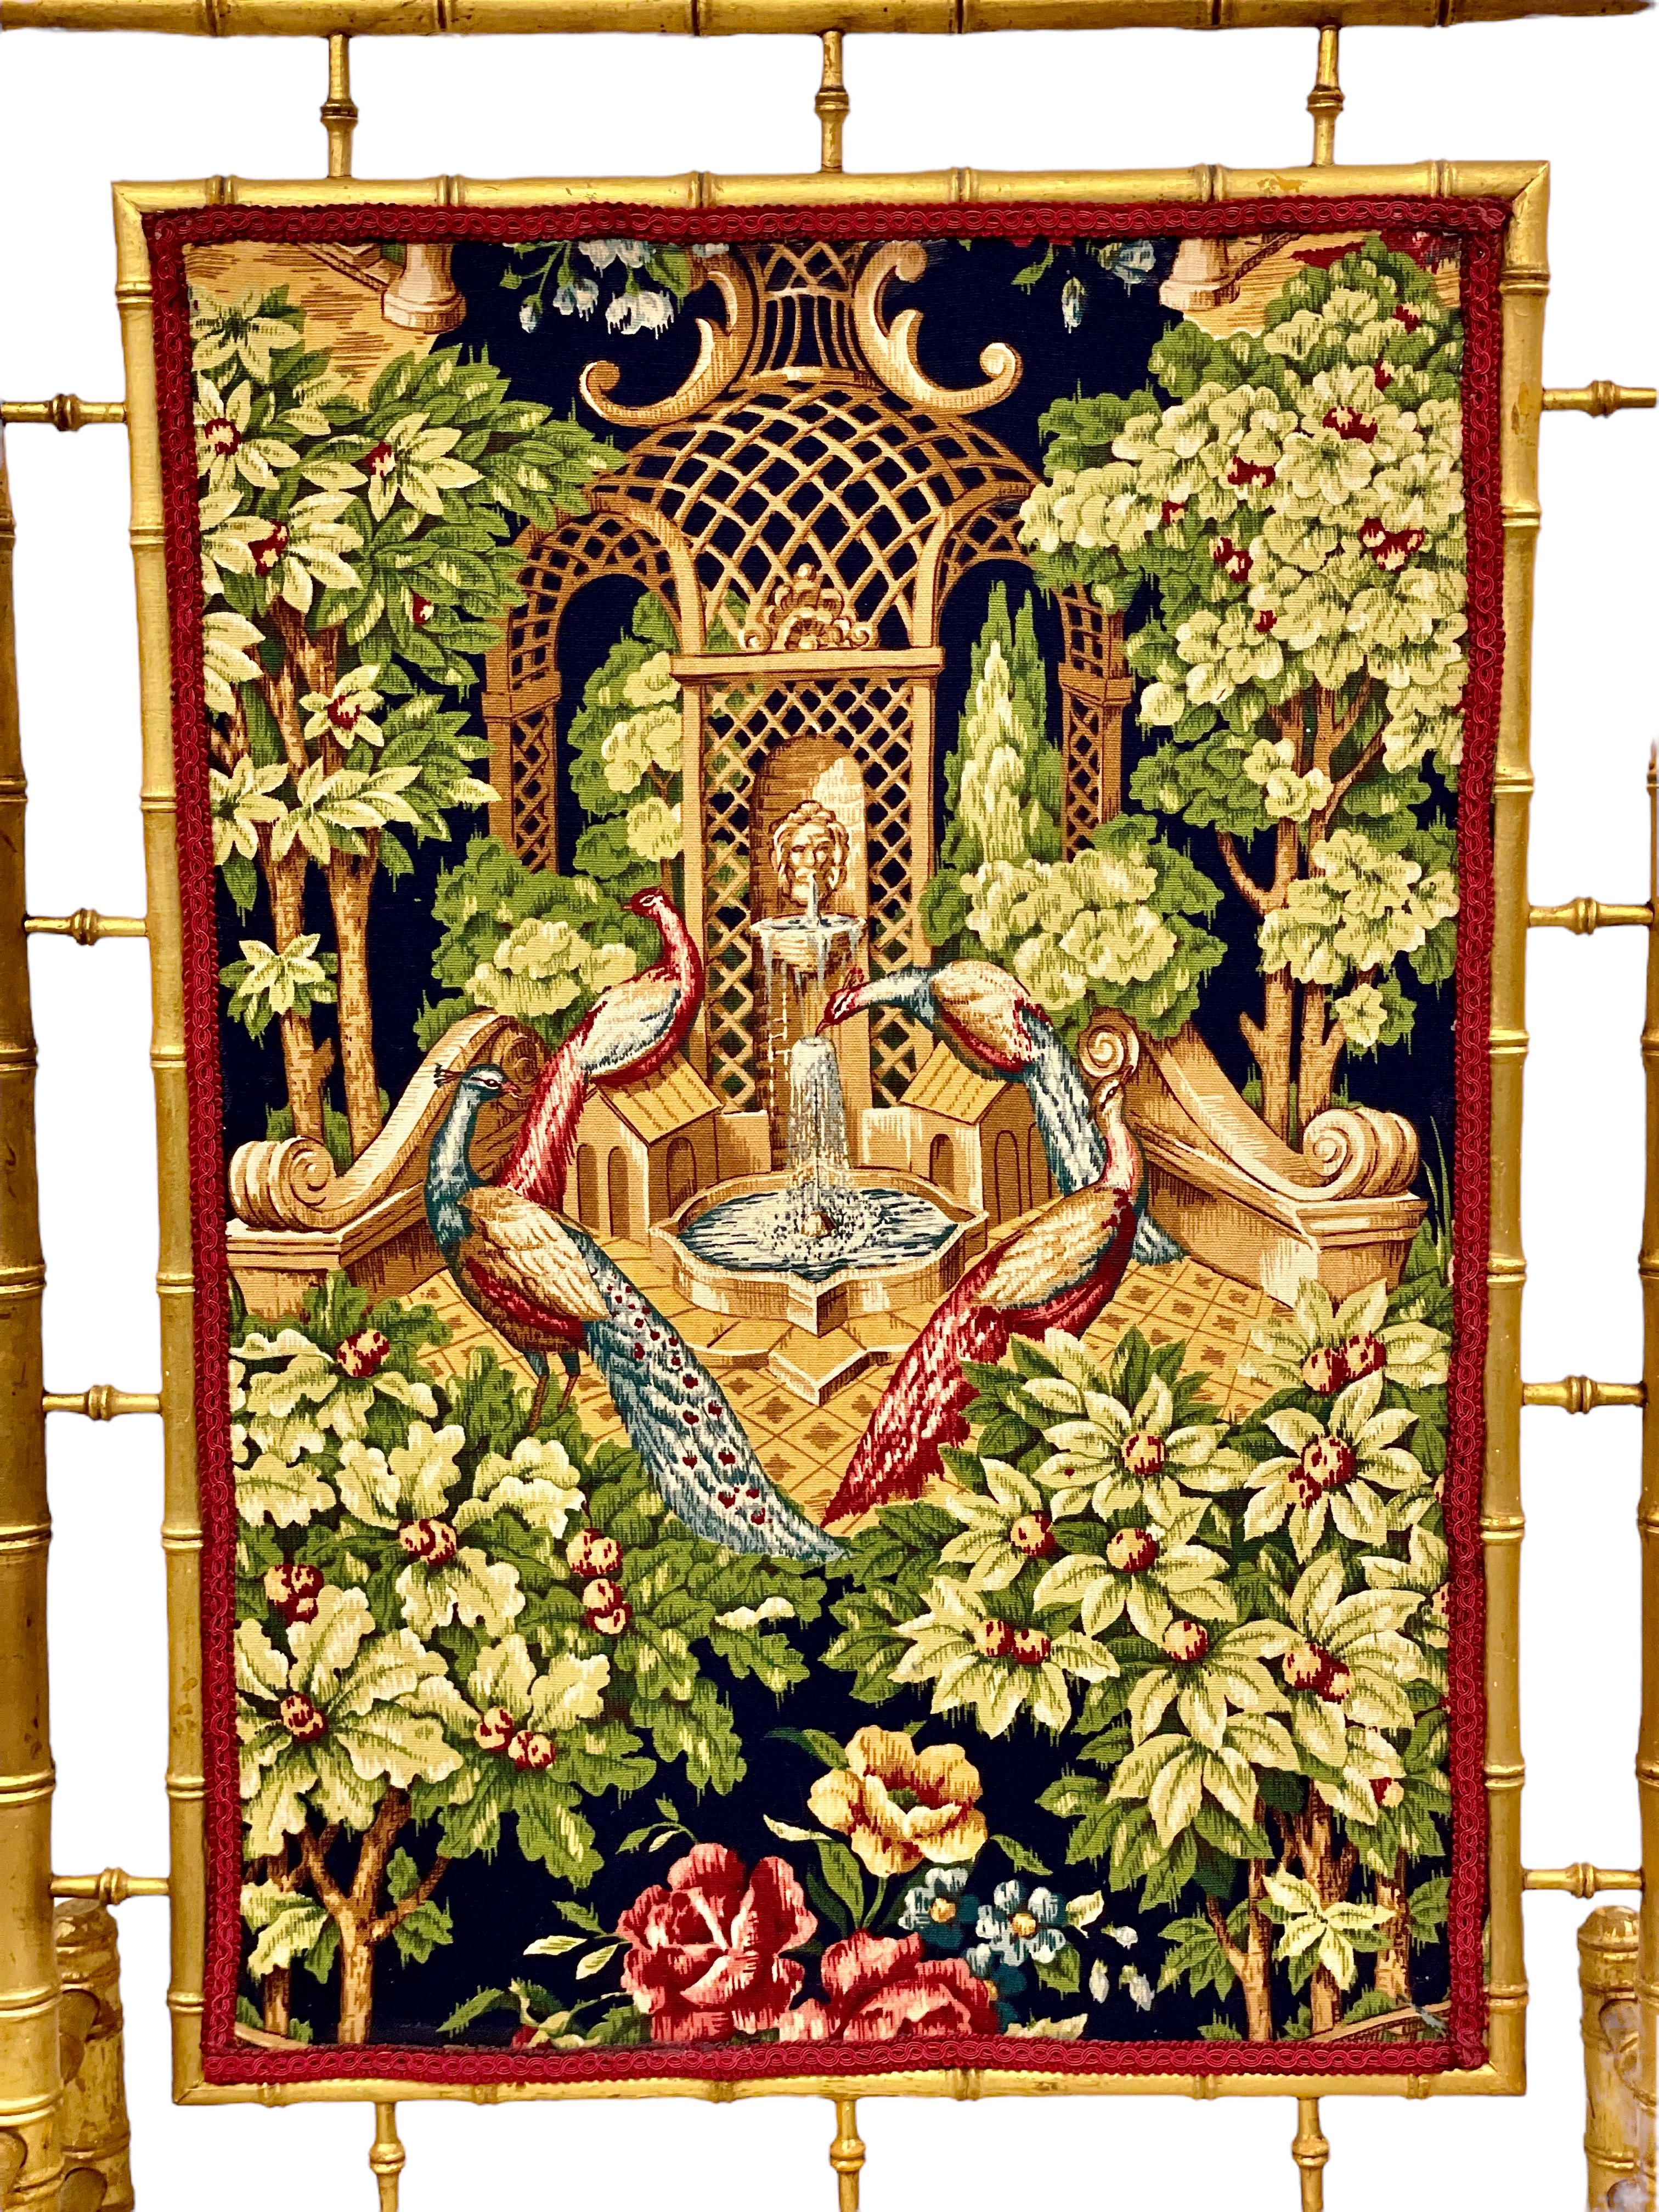 This superb faux-bamboo giltwood firescreen has been exquisitely crafted with a Japanese- inspired tapestry panel at its centre, which features a colourful design of peacocks assembling under an architectural pagoda, surrounded by lush tropical